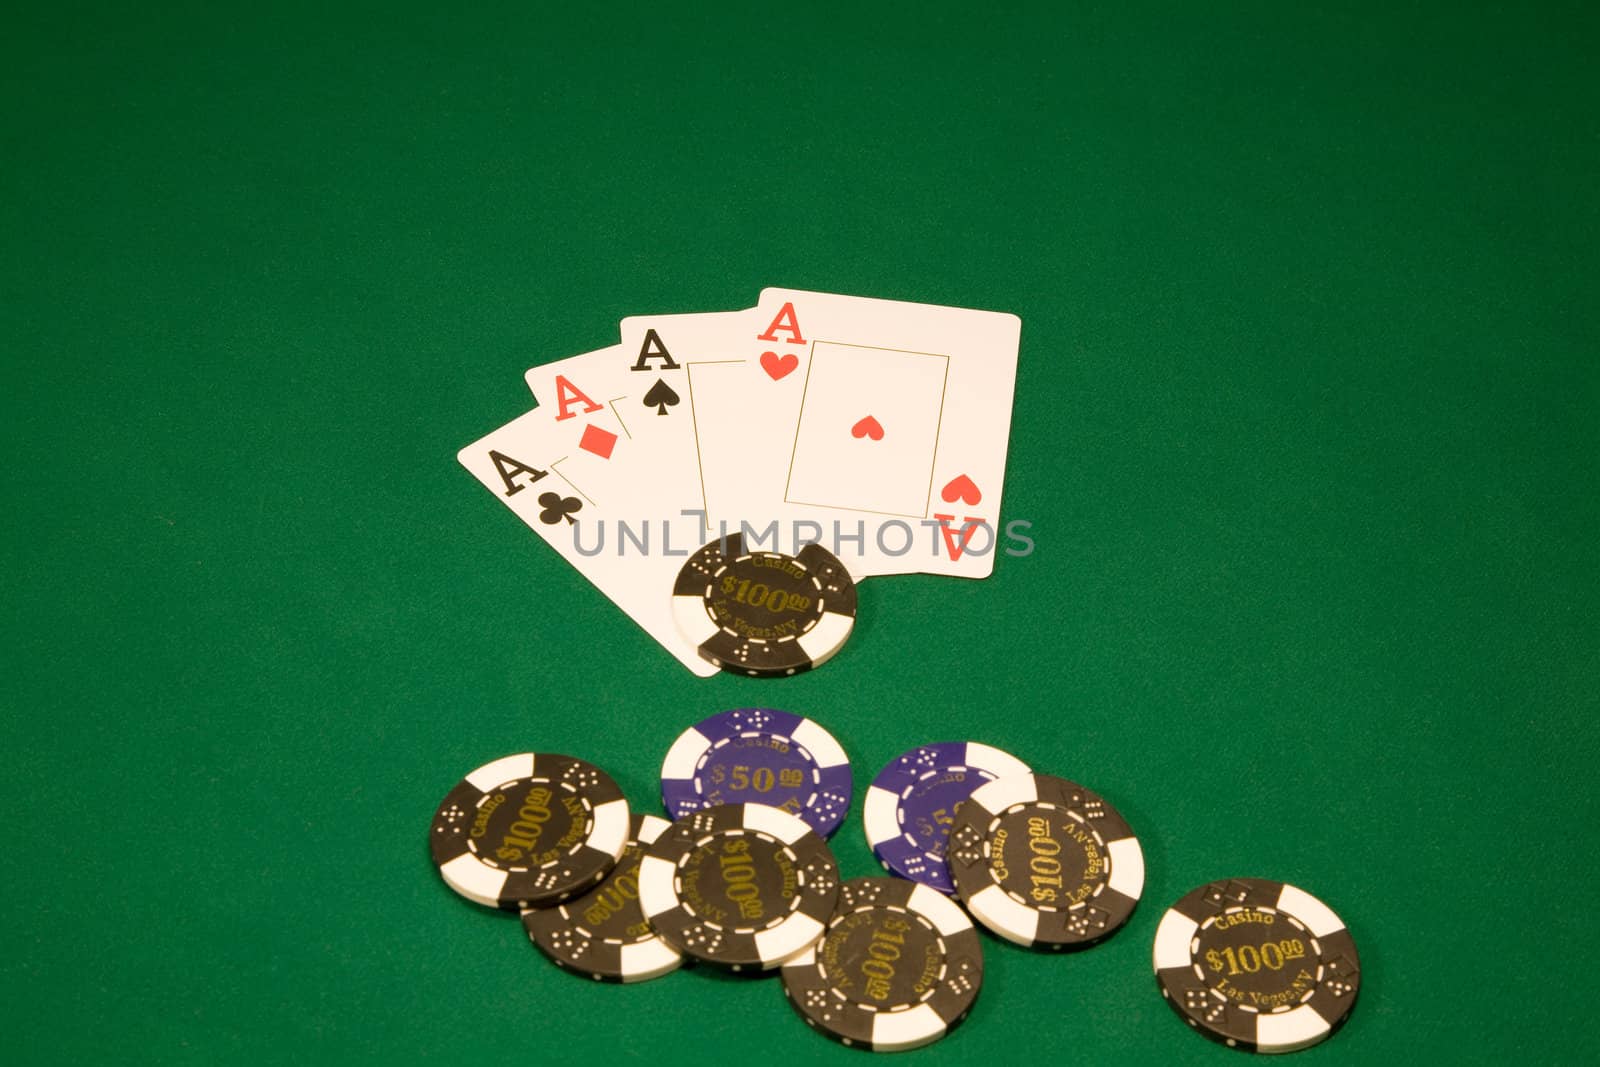 Chips with four aces on the green table in casino